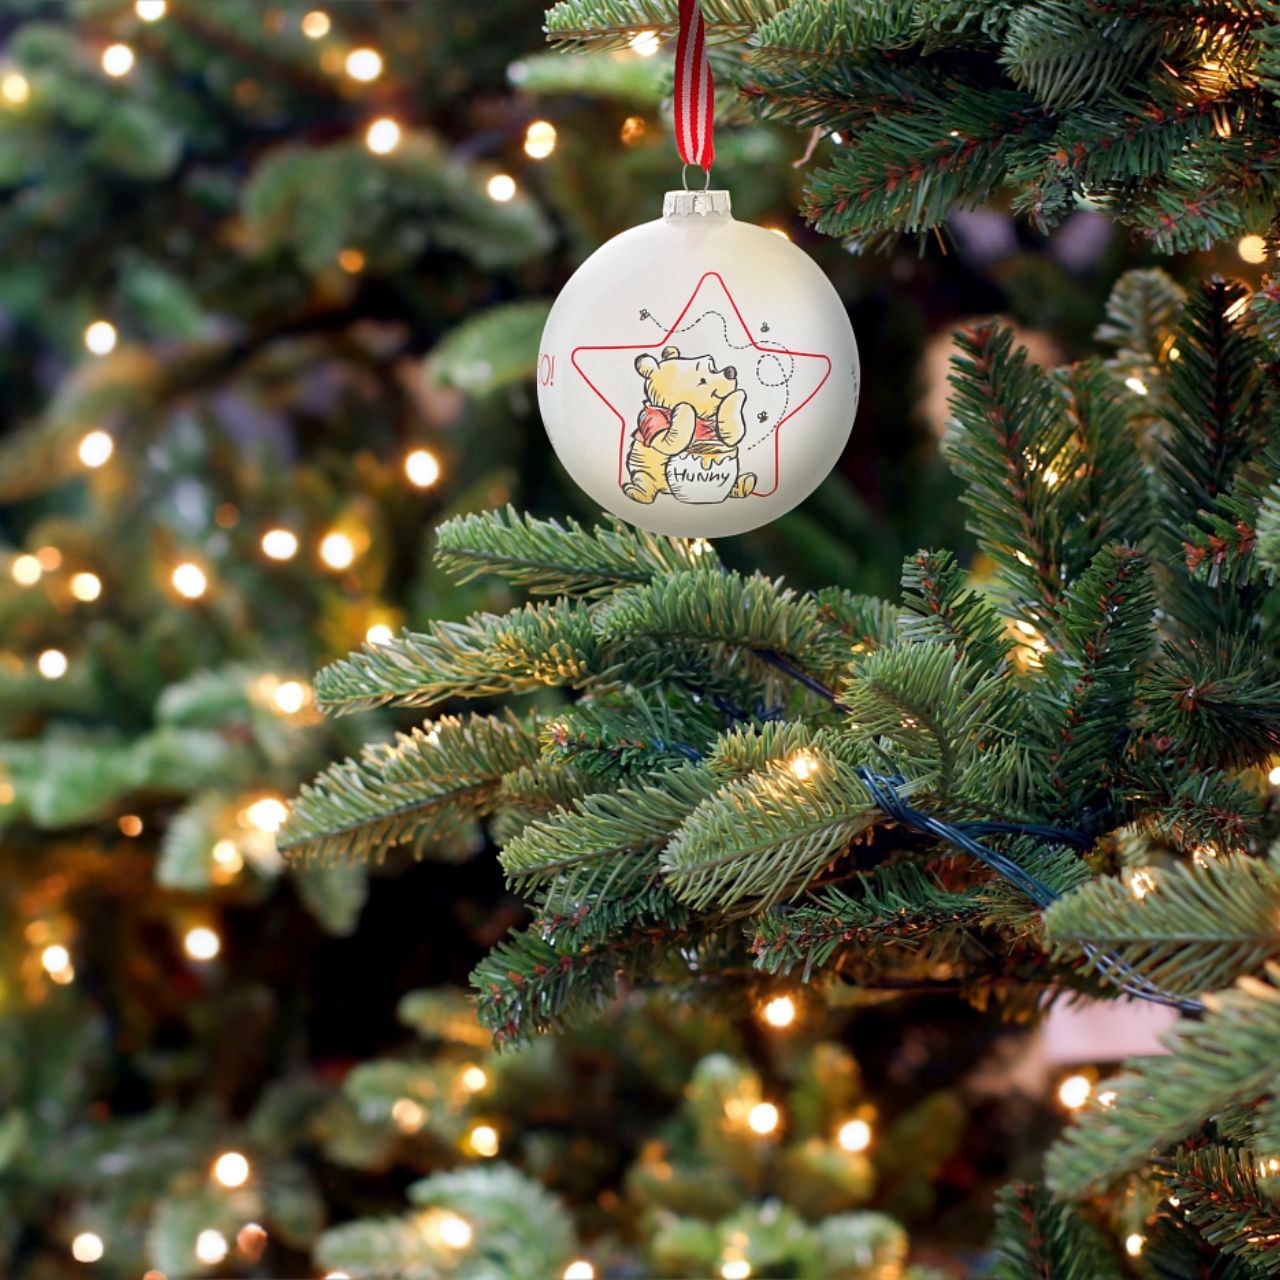 Christmas Bauble Disney Winnie The Pooh  Winnie the Pooh dreams about honey all day and this cute design shows that it is no exception at Christmas time. Sometimes the smallest things take up the most room in your heart and this glass bauble is the perfect example.